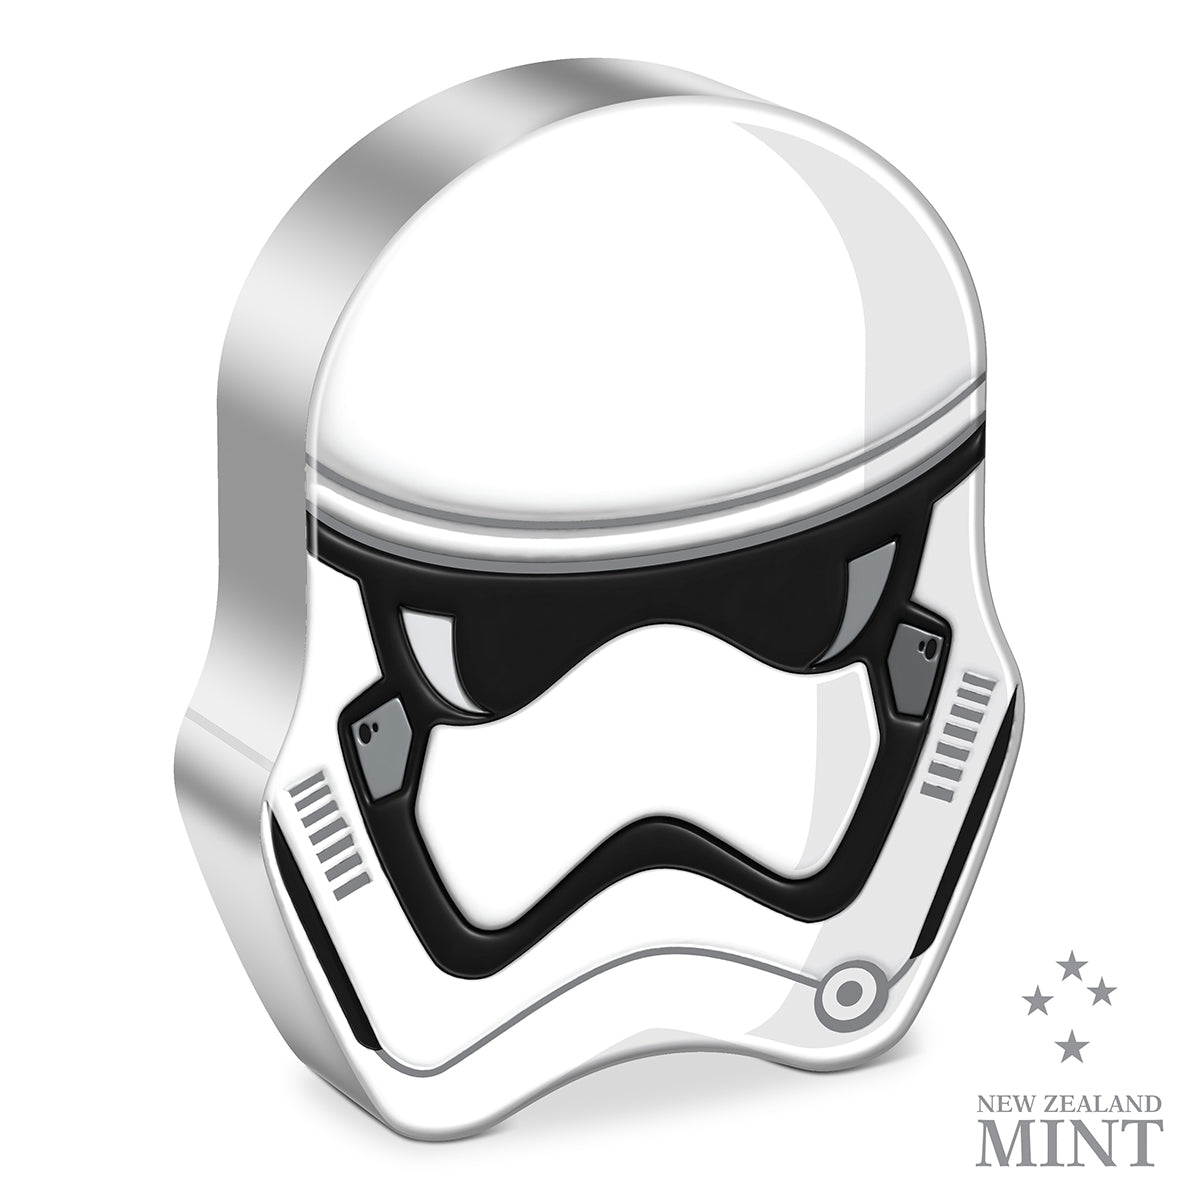 Niue Mint 2022 The Faces of the First Order Stormtrooper 1 oz Silver Coin